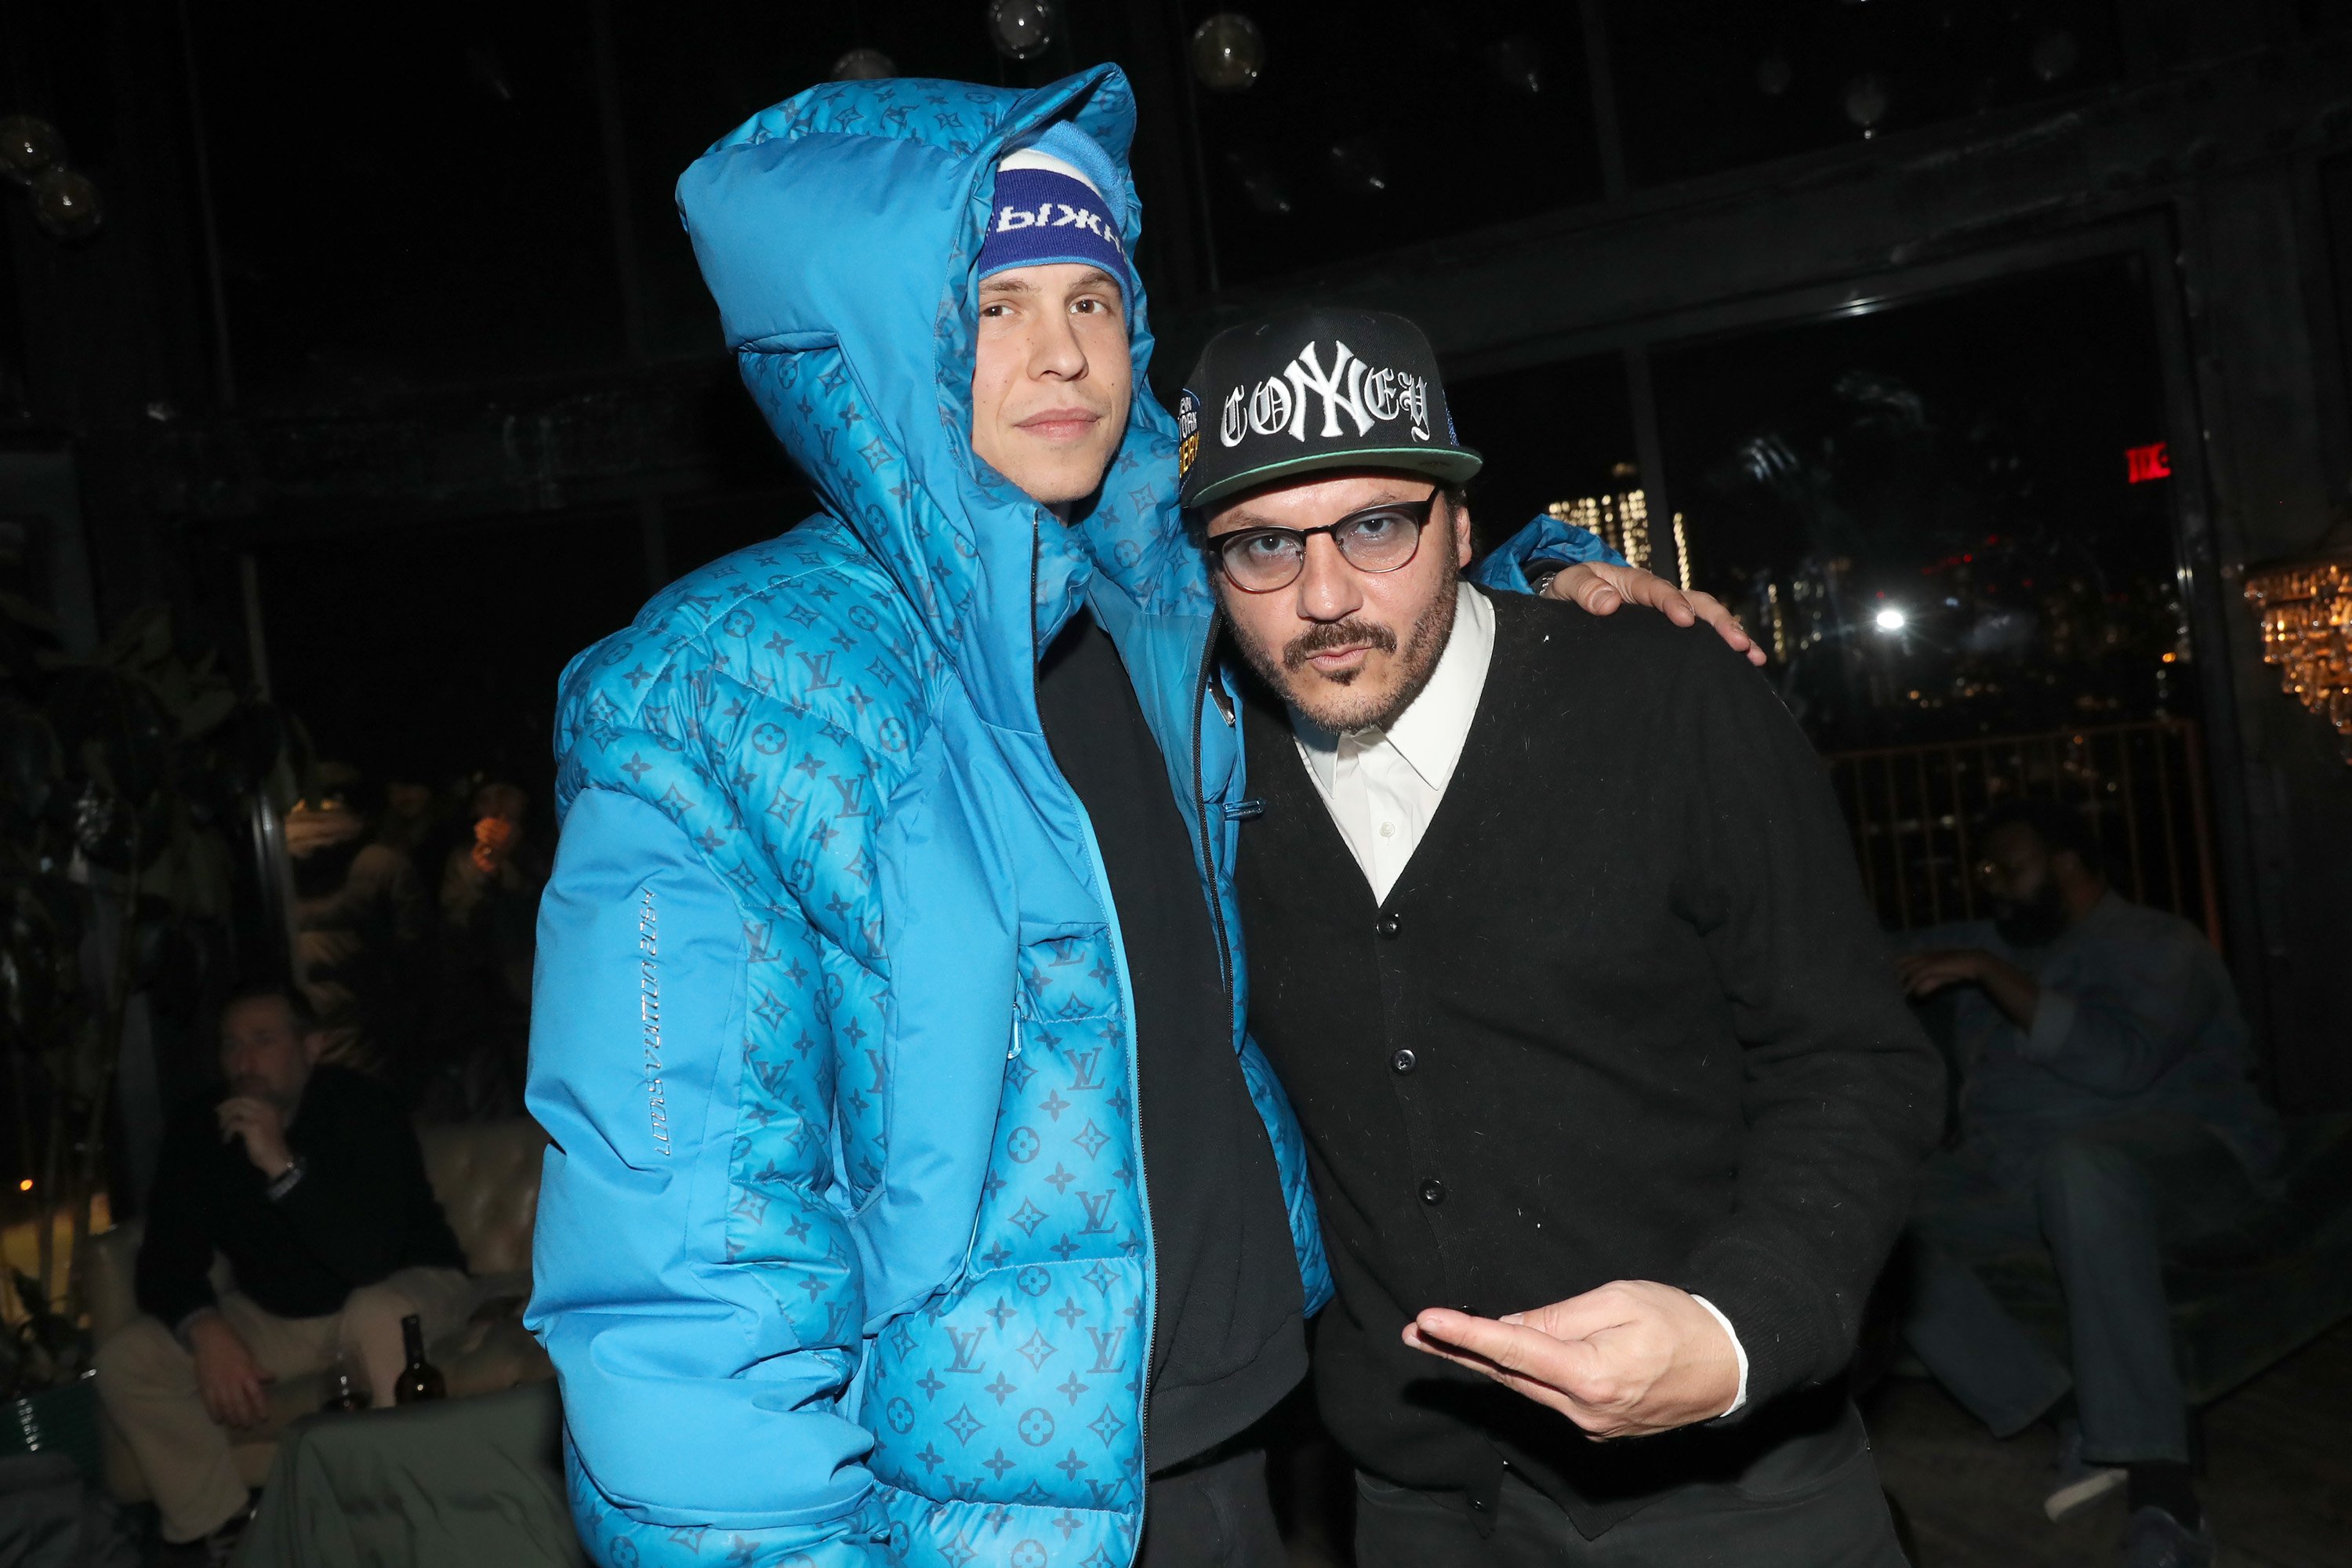 Peter Artemiev and Alberto Polo Cretara attending the BIG50 Hip Hop Celebration in Brooklyn | Source: Getty Images